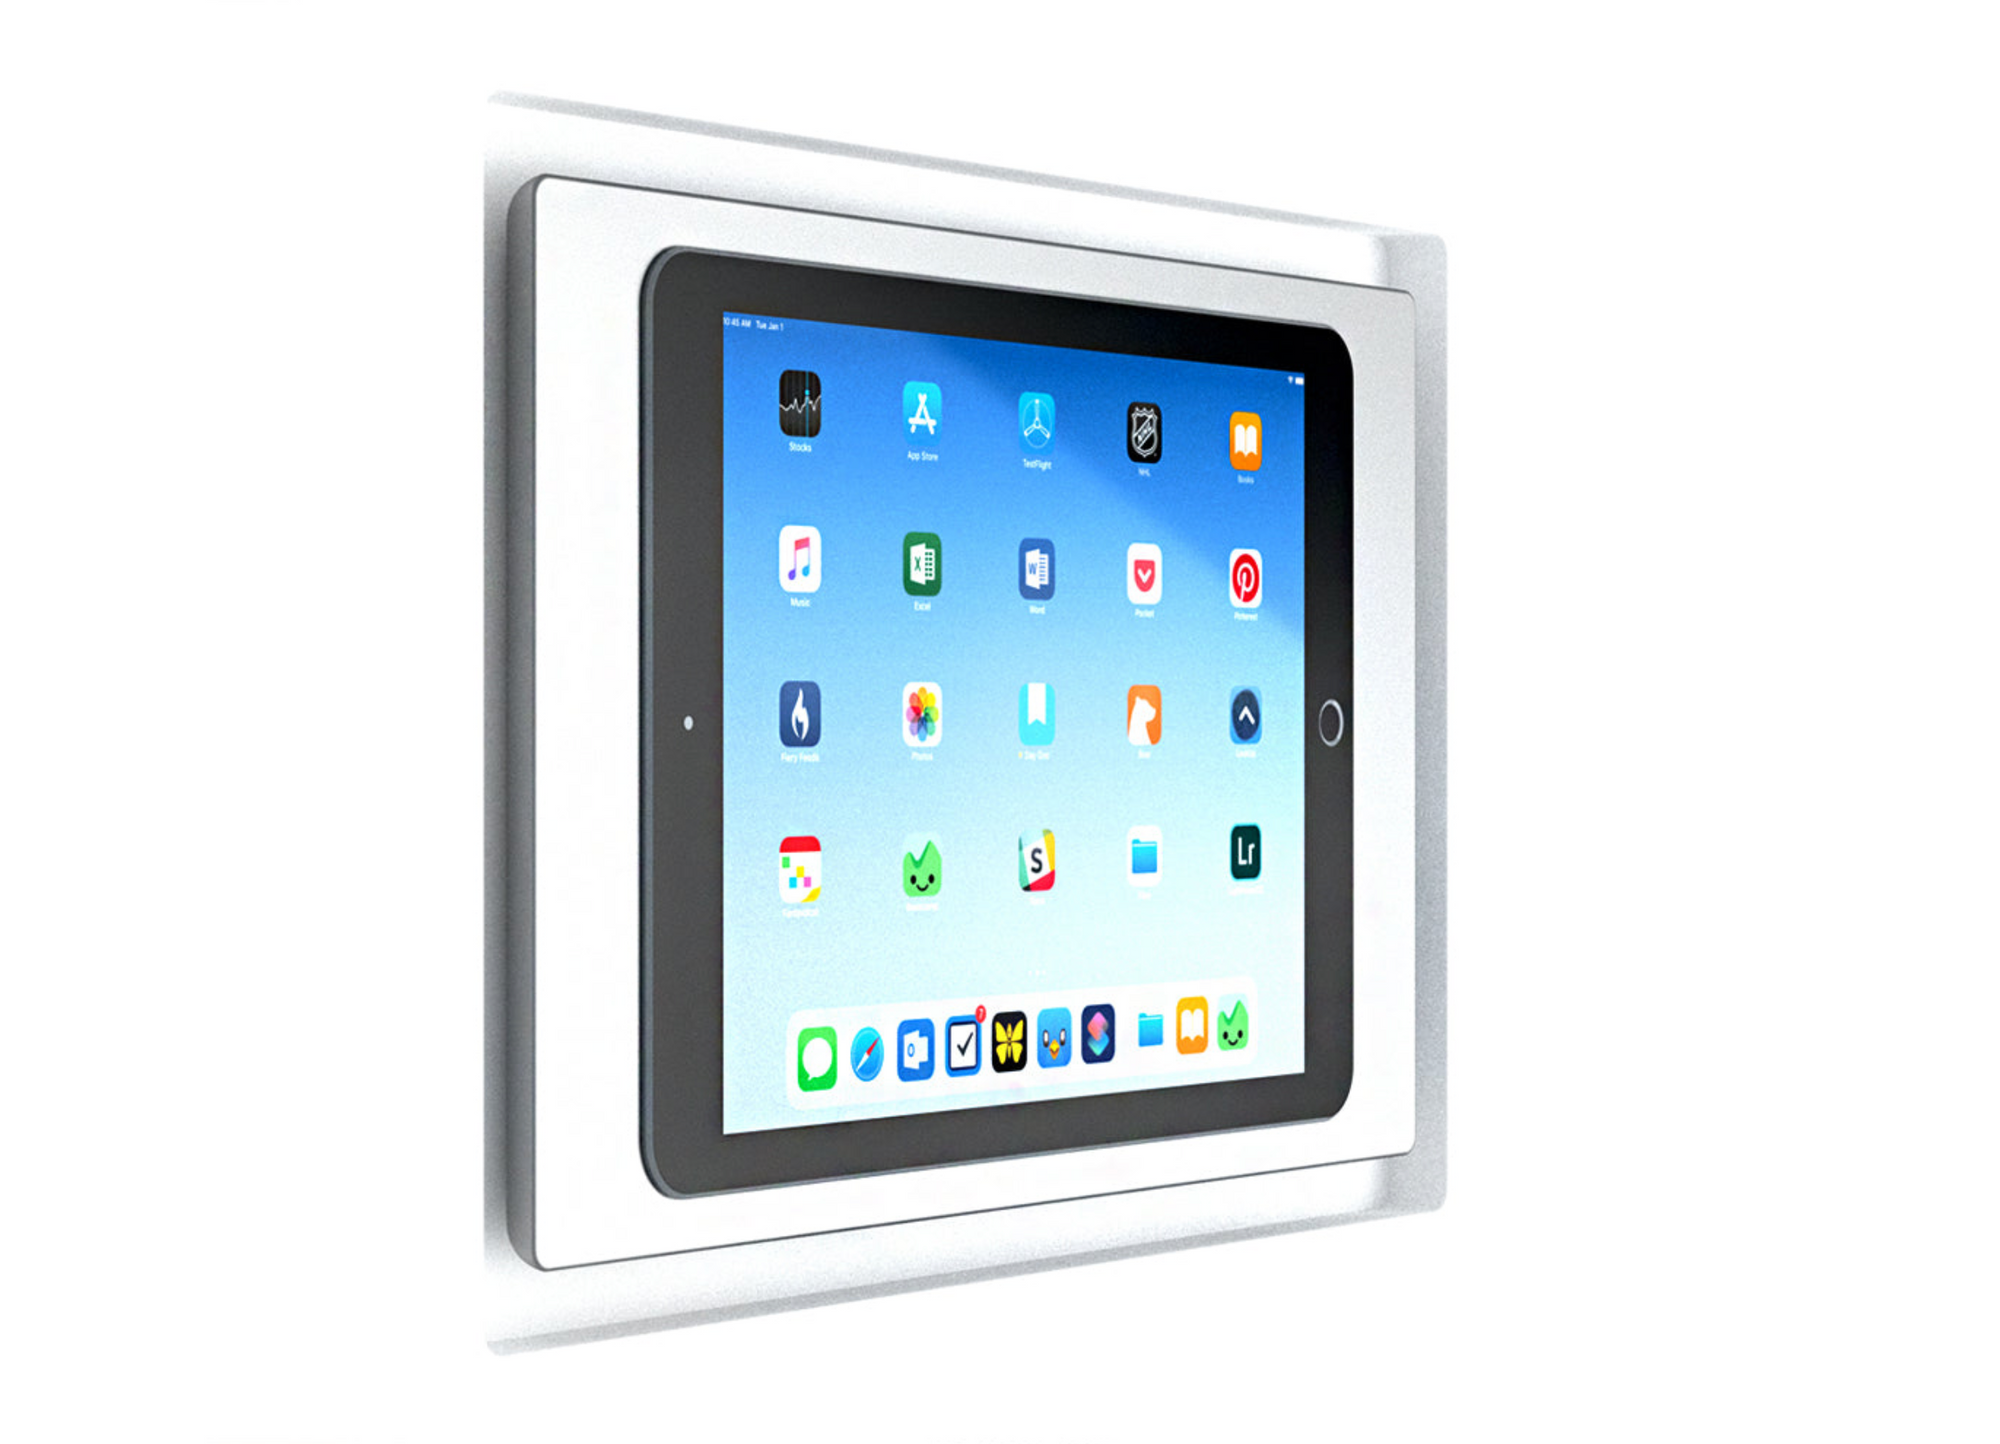 SL-IPCPL-375 Large iPad In-Wall Mount. iPad Designer Style In-Wall Plaster Mounting Platform (Large). Seamless Mounting Platform Upgrade. Update to New Seamless iPad Mounting Solution.